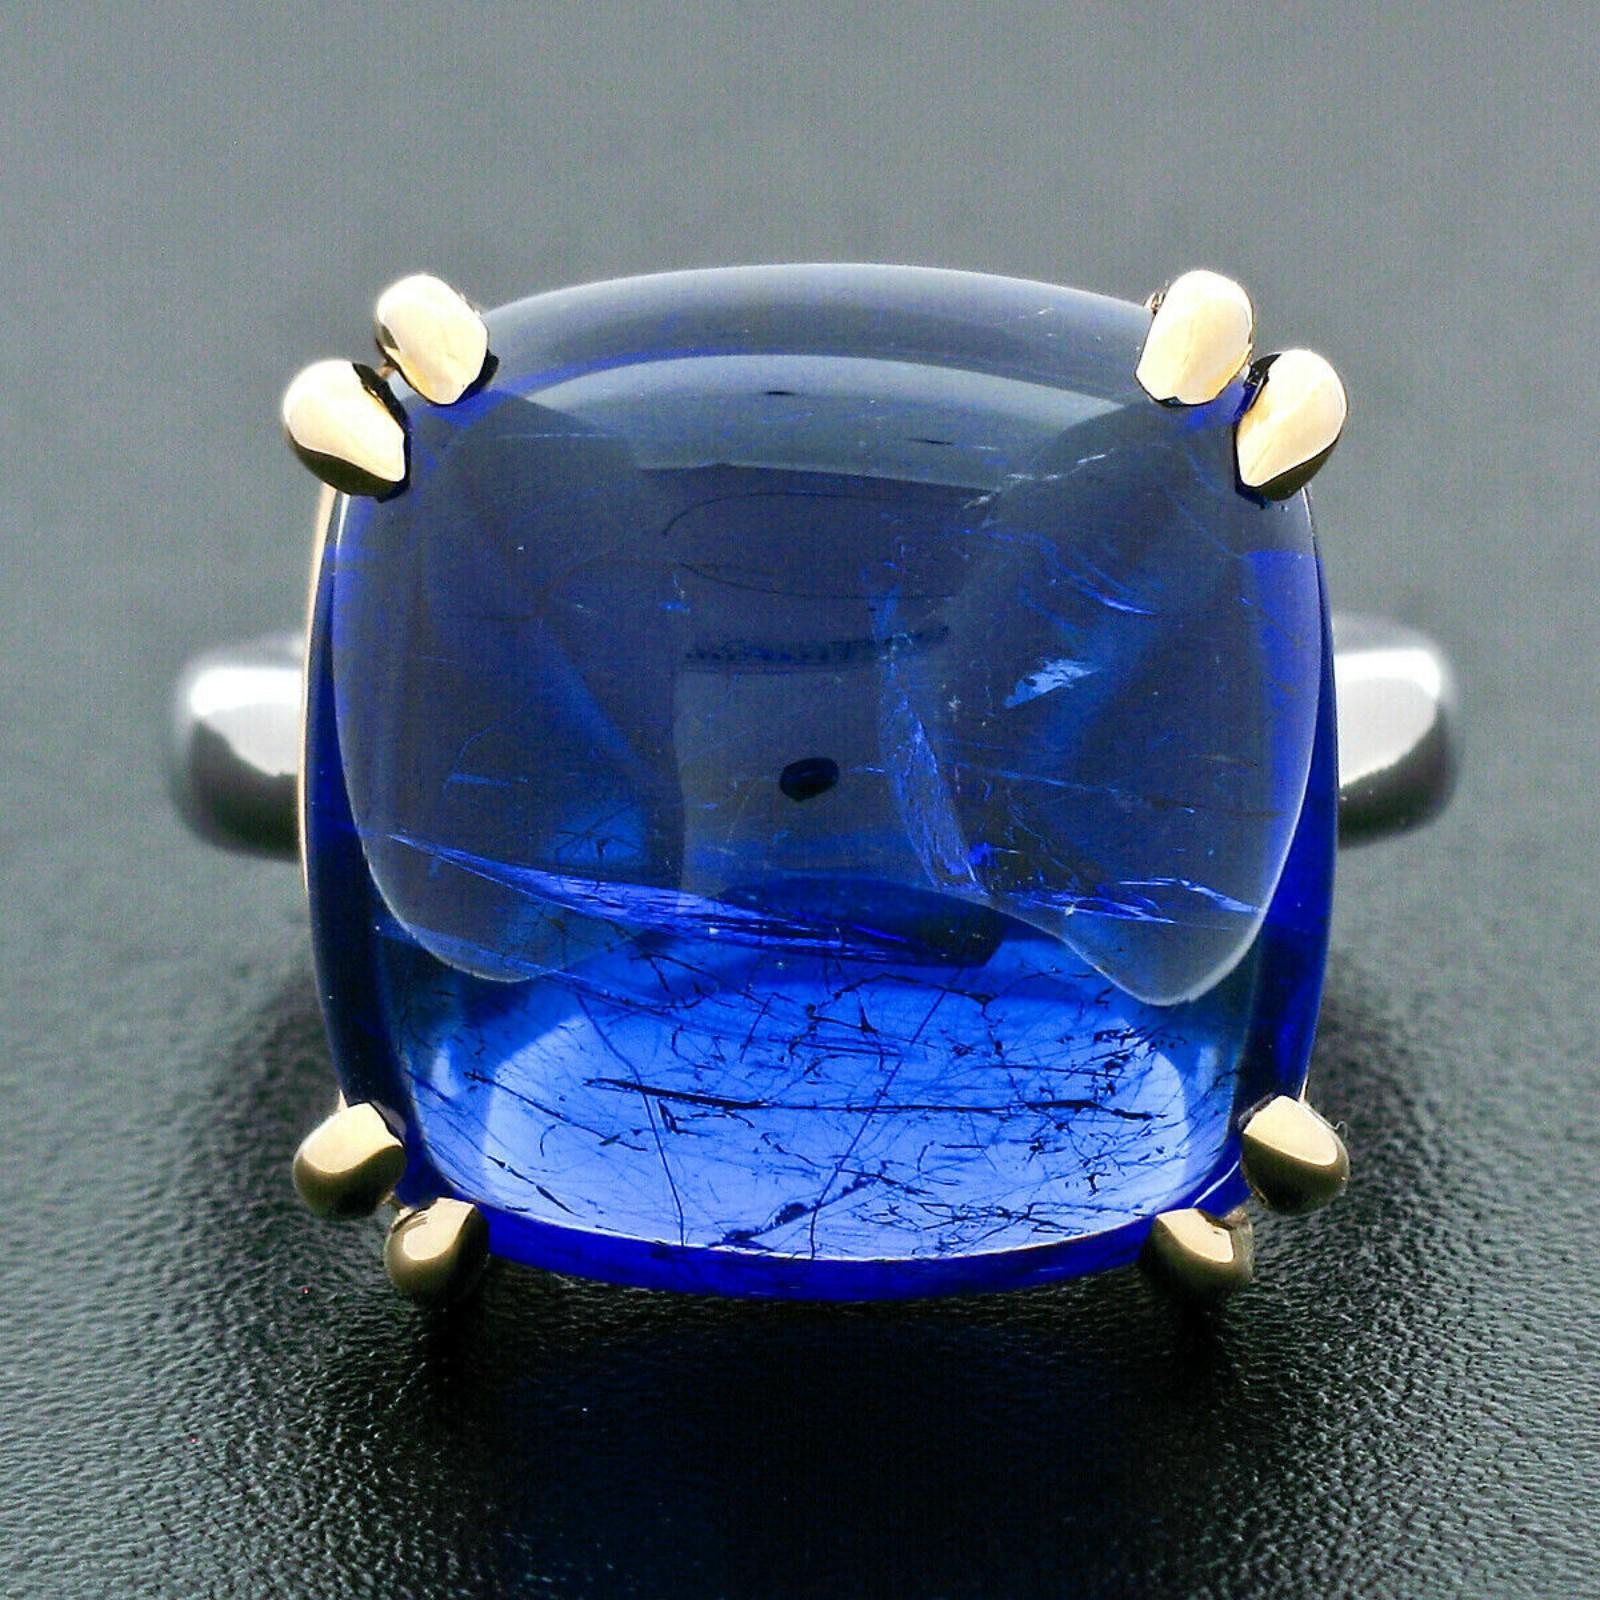 You are looking at a truly fine and breathtaking, GIA certified tanzanite cocktail statement ring hand crafted in solid platinum and 18k yellow gold. The ring features a very fine quality tanzanite solitaire with an outstandingly rich violetish blue